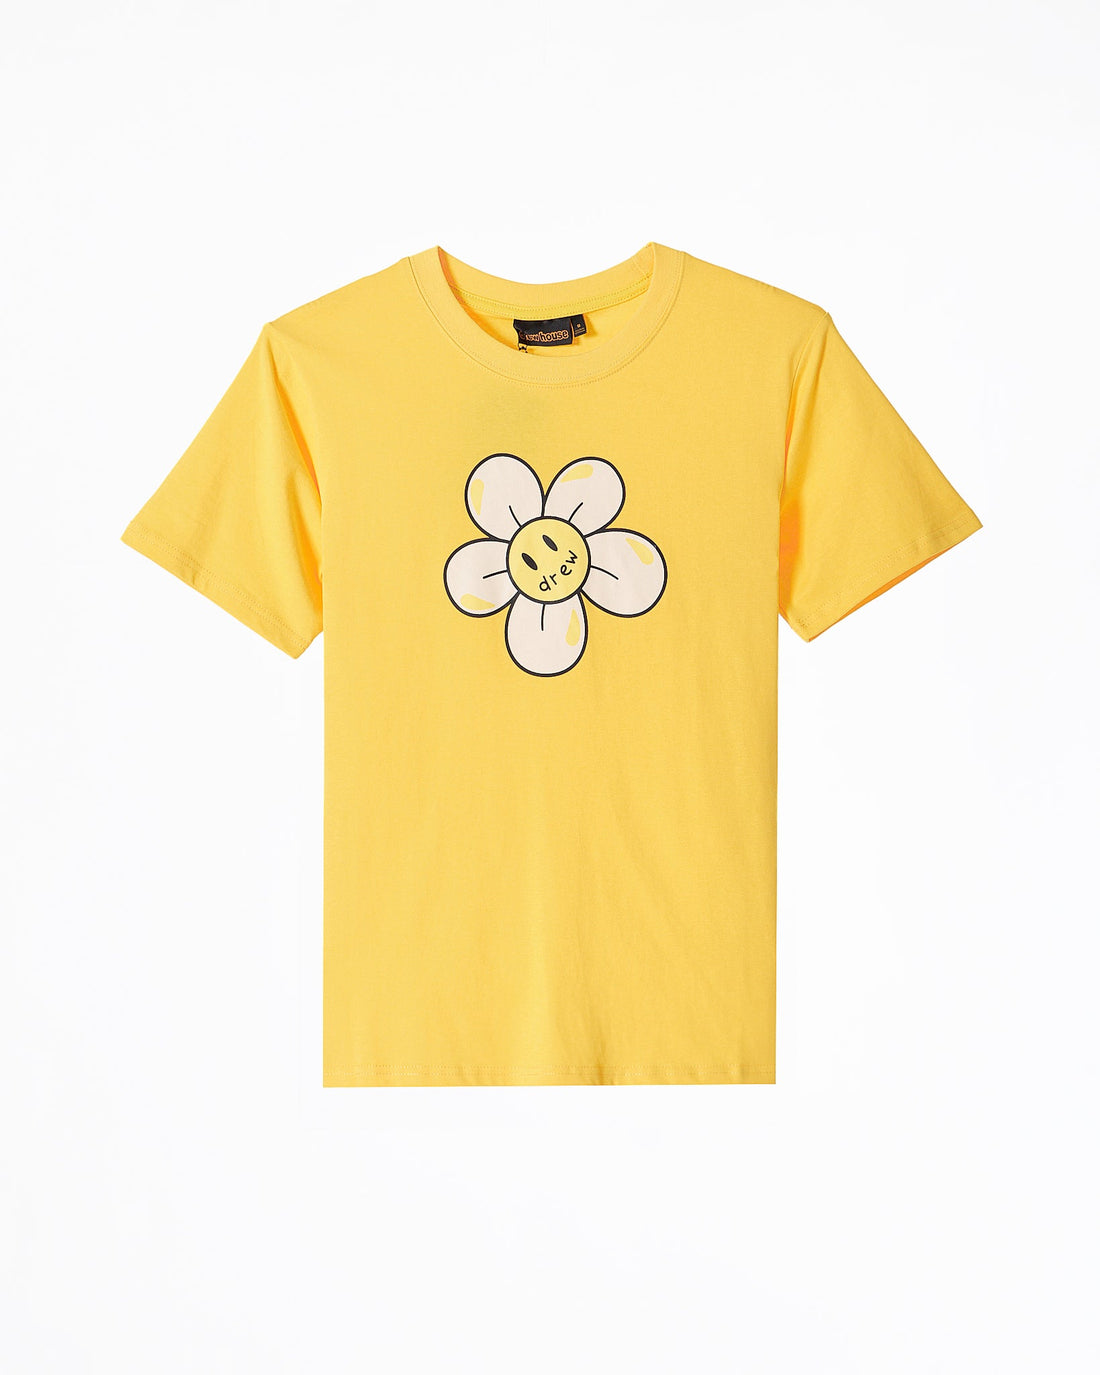 MOI OUTFIT-DRE Flower Smiling Unisex Yellow T-Shirt 19.90